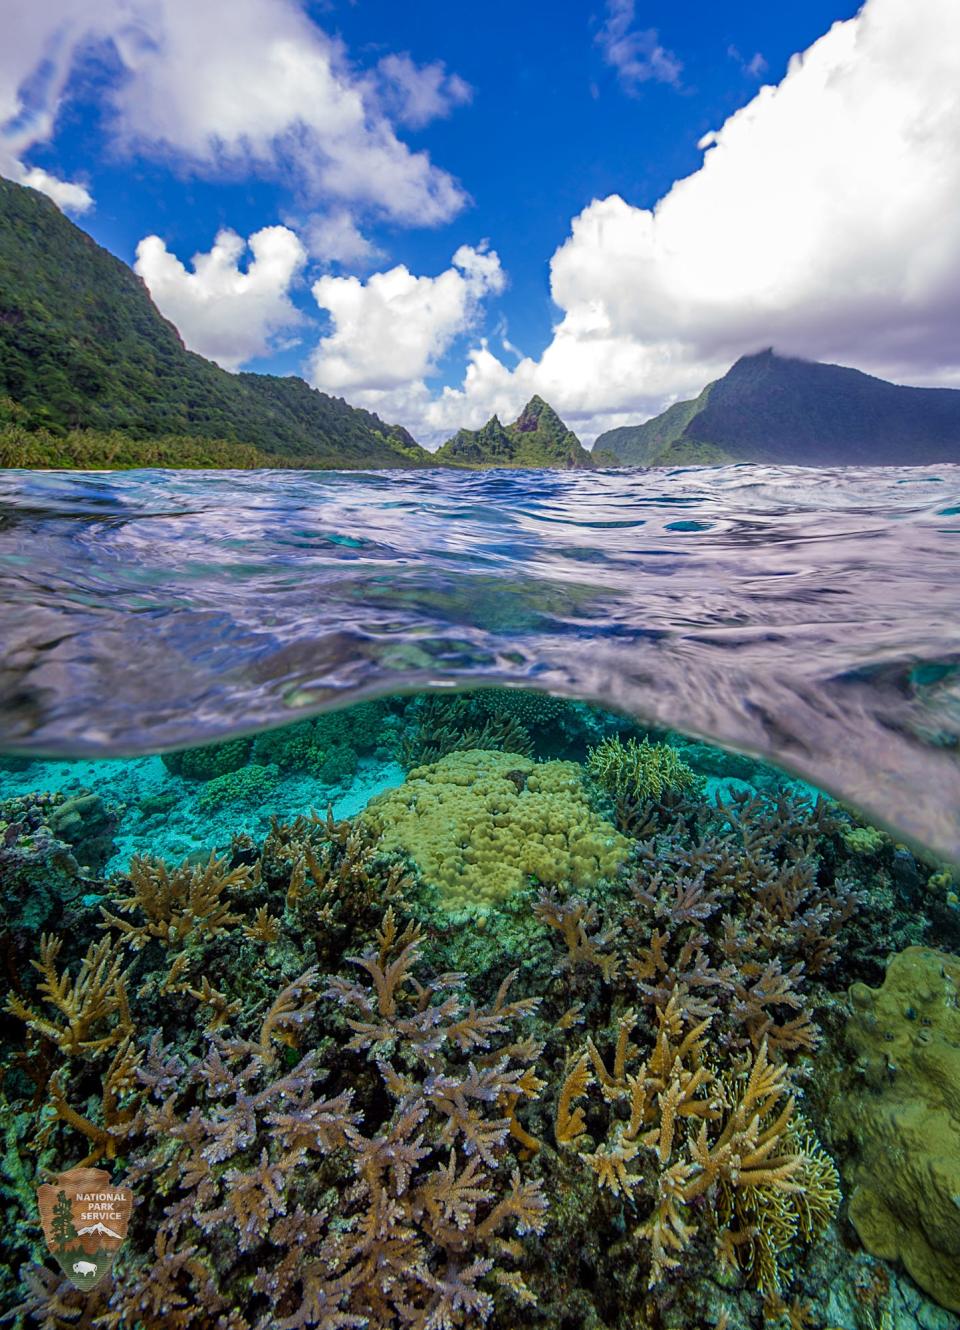 Visitors can enjoy snorkeling and diving in National Park of American Samoa's 4,000 marine acres.